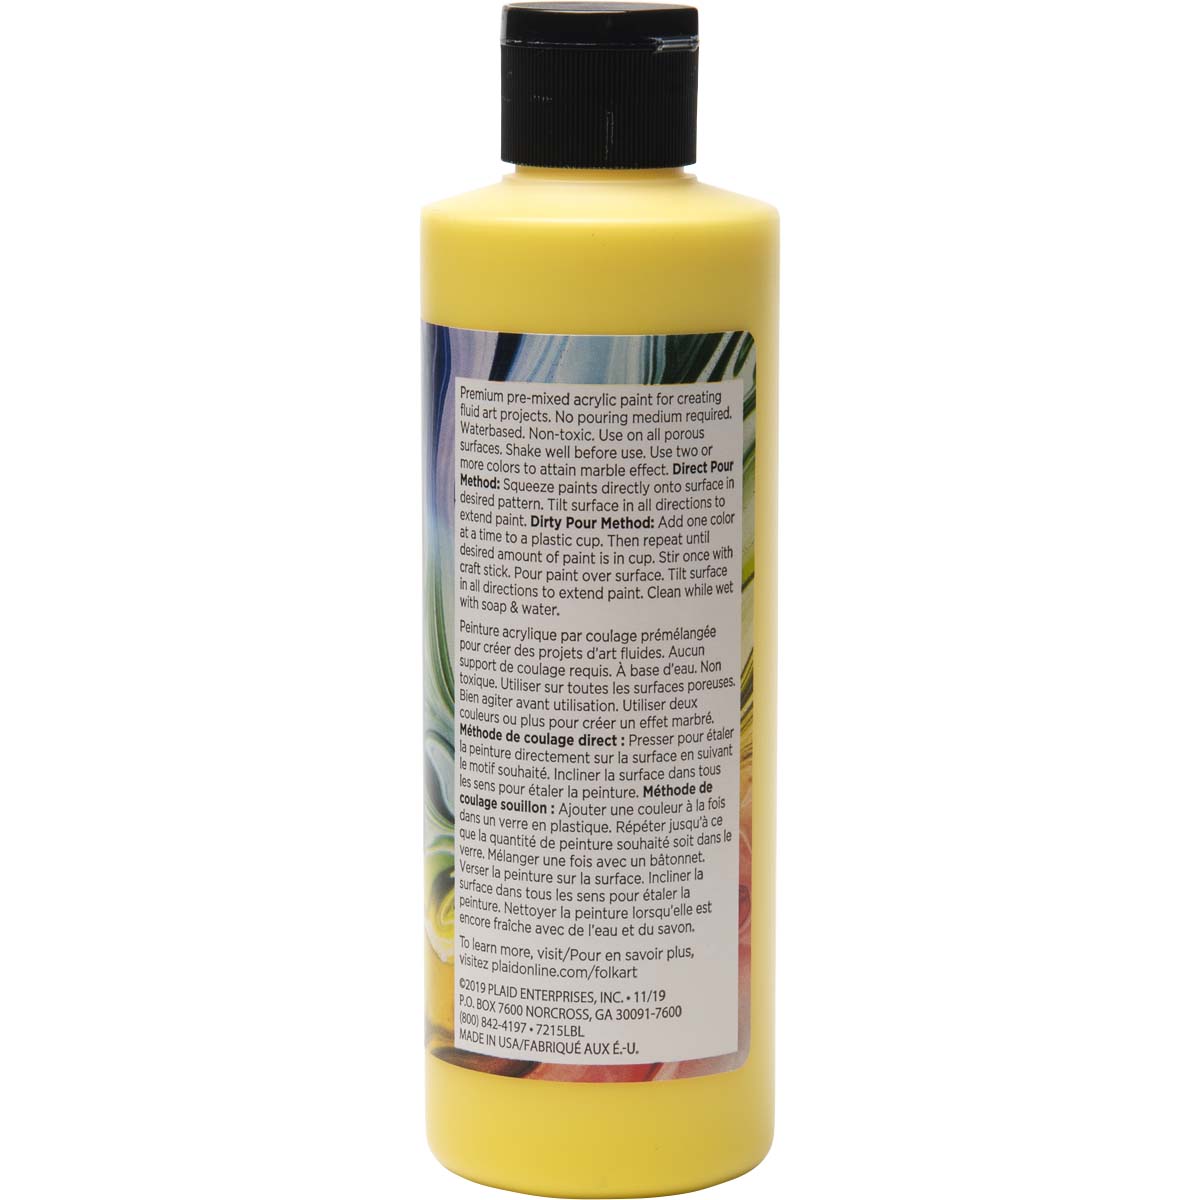 FolkArt ® Pre-mixed Pouring Paint - Yellow, 8 oz. - 7215